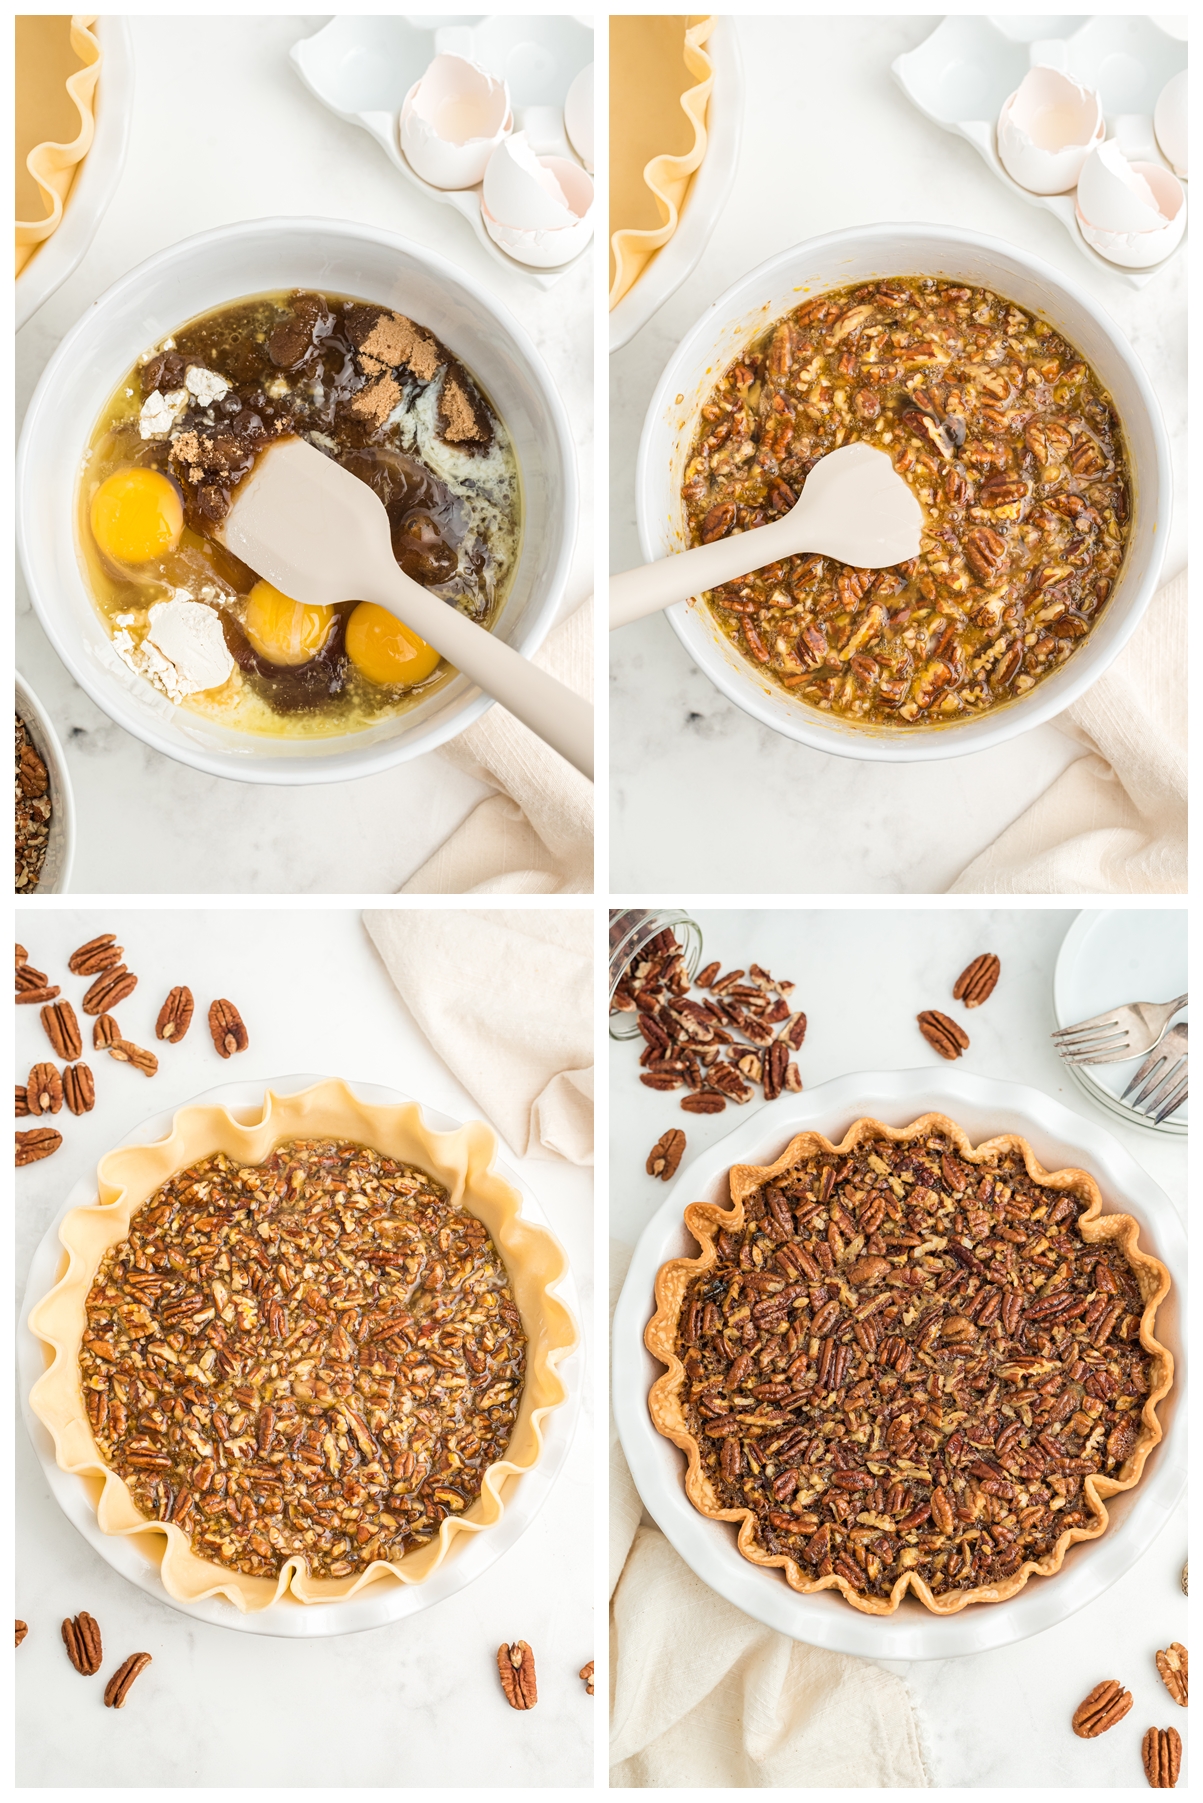 Procedure of making a classic pecan pie. First is combine all the ingredients in a white bowl. The second is mixing them until smooth. Then pour the pie mixture on a shell and bake for 40 minutes. 